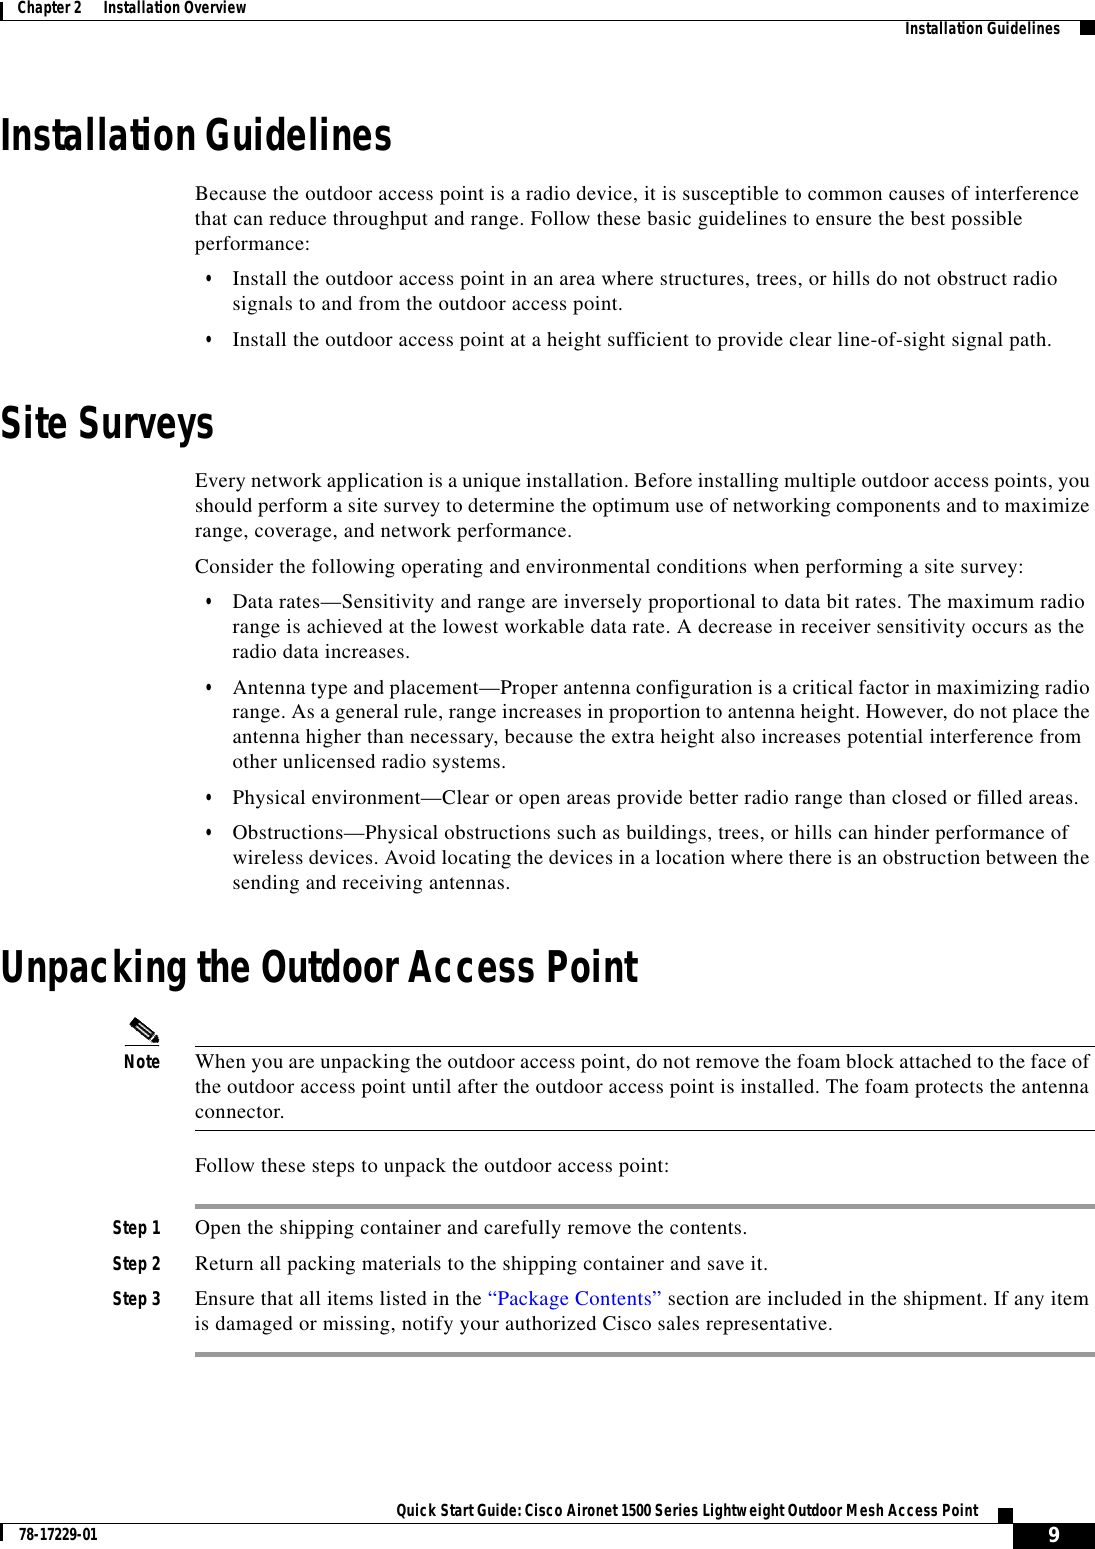  9Quick Start Guide: Cisco Aironet 1500 Series Lightweight Outdoor Mesh Access Point78-17229-01Chapter 2      Installation Overview   Installation GuidelinesInstallation GuidelinesBecause the outdoor access point is a radio device, it is susceptible to common causes of interference that can reduce throughput and range. Follow these basic guidelines to ensure the best possible performance:•Install the outdoor access point in an area where structures, trees, or hills do not obstruct radio signals to and from the outdoor access point.•Install the outdoor access point at a height sufficient to provide clear line-of-sight signal path.Site SurveysEvery network application is a unique installation. Before installing multiple outdoor access points, you should perform a site survey to determine the optimum use of networking components and to maximize range, coverage, and network performance.Consider the following operating and environmental conditions when performing a site survey:•Data rates—Sensitivity and range are inversely proportional to data bit rates. The maximum radio range is achieved at the lowest workable data rate. A decrease in receiver sensitivity occurs as the radio data increases.•Antenna type and placement—Proper antenna configuration is a critical factor in maximizing radio range. As a general rule, range increases in proportion to antenna height. However, do not place the antenna higher than necessary, because the extra height also increases potential interference from other unlicensed radio systems.•Physical environment—Clear or open areas provide better radio range than closed or filled areas. •Obstructions—Physical obstructions such as buildings, trees, or hills can hinder performance of wireless devices. Avoid locating the devices in a location where there is an obstruction between the sending and receiving antennas.Unpacking the Outdoor Access PointNote When you are unpacking the outdoor access point, do not remove the foam block attached to the face of the outdoor access point until after the outdoor access point is installed. The foam protects the antenna connector.Follow these steps to unpack the outdoor access point:Step 1 Open the shipping container and carefully remove the contents. Step 2 Return all packing materials to the shipping container and save it.Step 3 Ensure that all items listed in the “Package Contents” section are included in the shipment. If any item is damaged or missing, notify your authorized Cisco sales representative. 